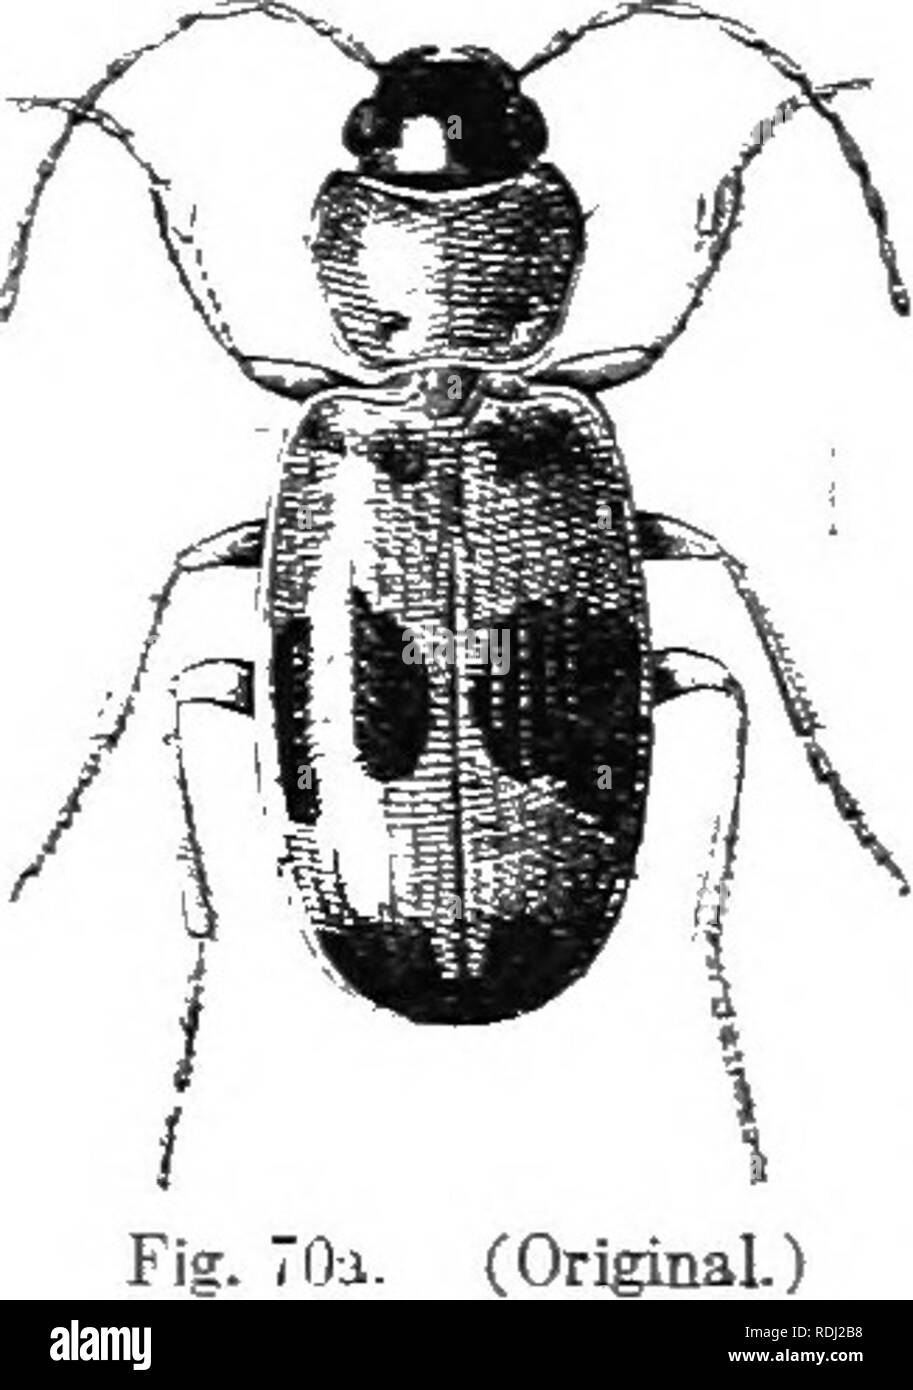 . An illustrated descriptive catalogue of the coleoptera or beetles (exclusive of the Rhynchophora) known to occur in Indiana : with bibliography and descriptions of new species . Beetles. lis FAillLY II. CAEABIIlj:. 1&gt;-S I 731,1. BAmsiER ^OTATUs Half!.. Proc. Phil. Acad. Nat. Sei.. I. 299. Elongate-oval, slender. Head and thorax black, shining; color other- wise as given in key. Thorax obcordate; hind angles obtuse; basal Impres- sions deep, linear; median impressed line entire, deep. Length Jr—1.5 mm. Lake. ^Marion. Crawford and Posey eotmties; rare. May 5-Xo- vember 8. Is'.i »I 7a2 i. P. Stock Photo